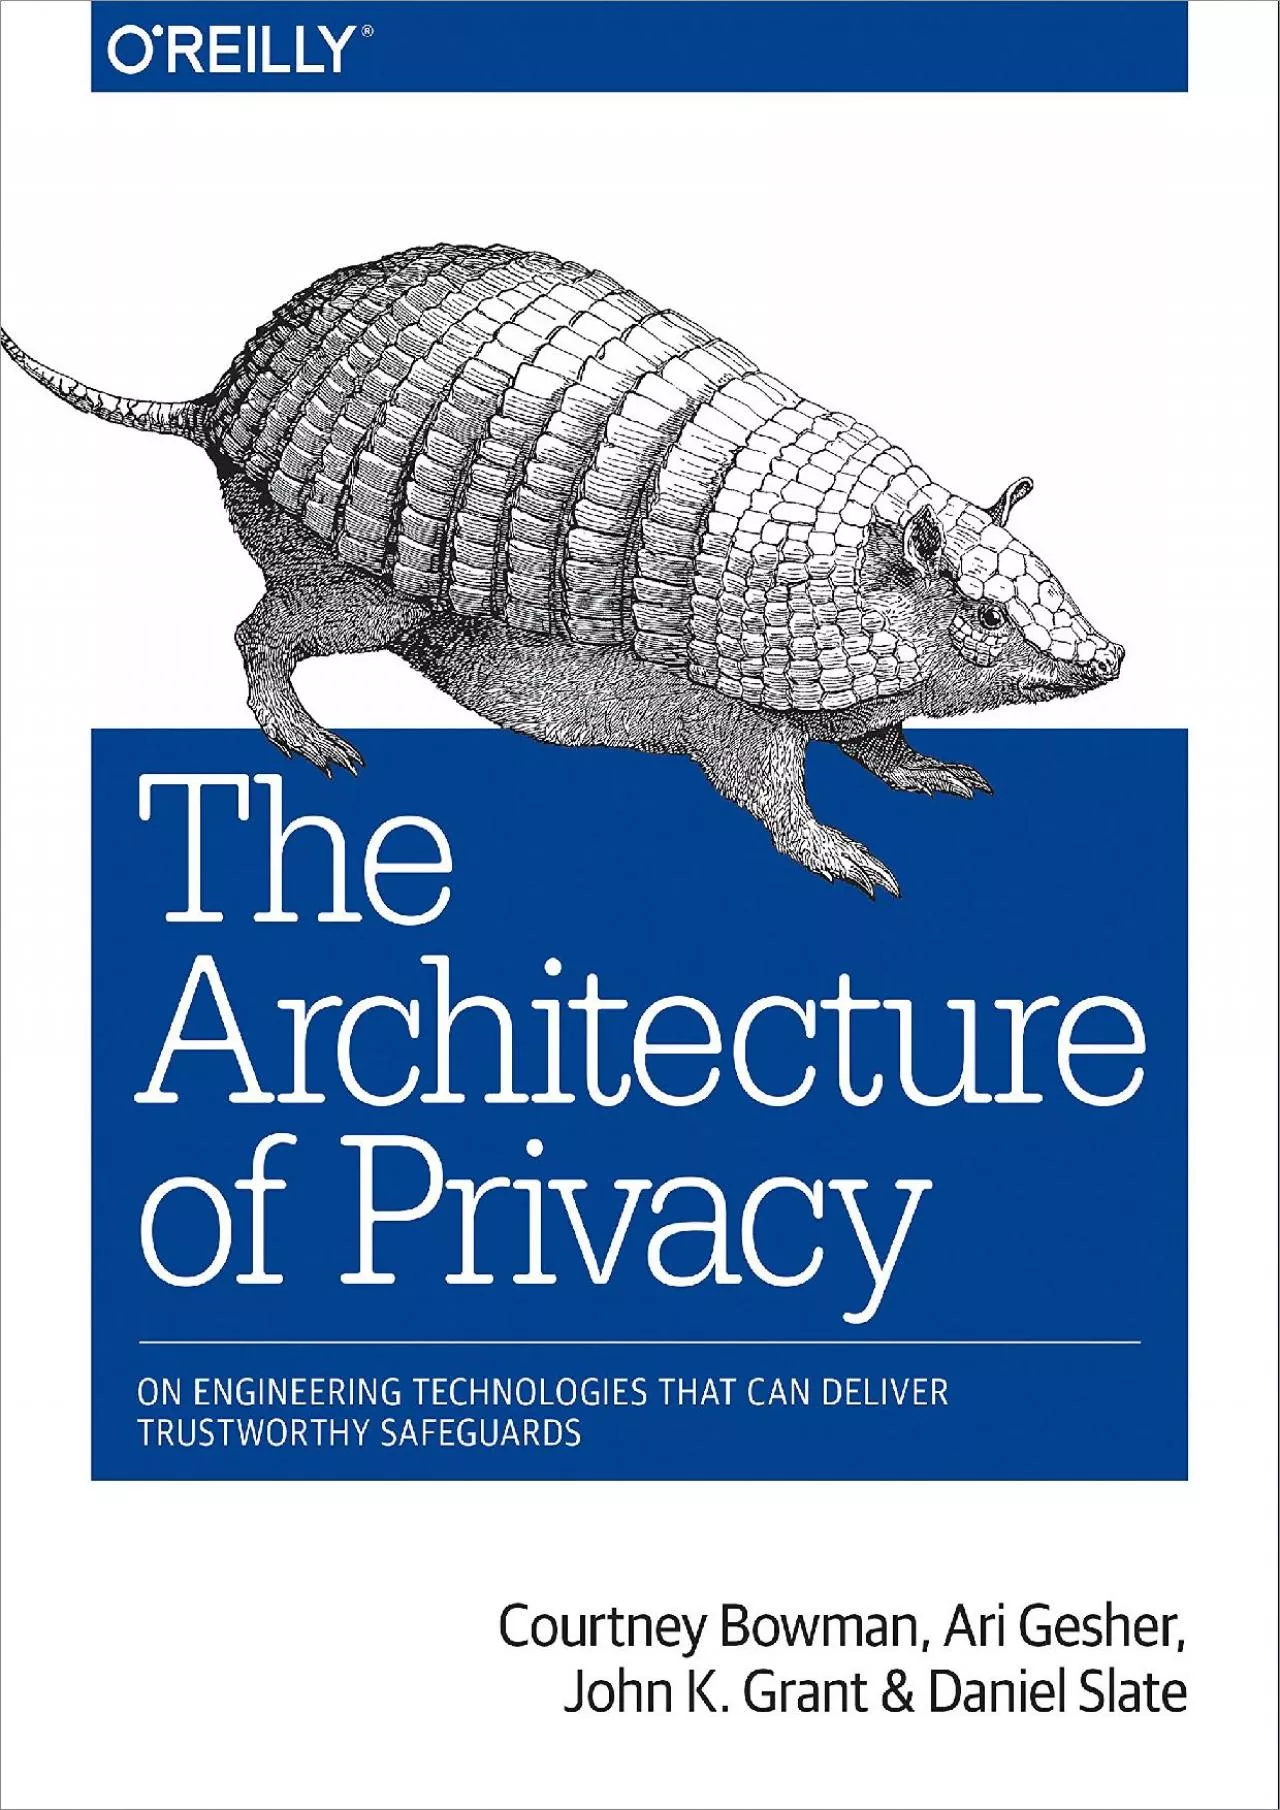 (BOOS)-The Architecture of Privacy: On Engineering Technologies that Can Deliver Trustworthy